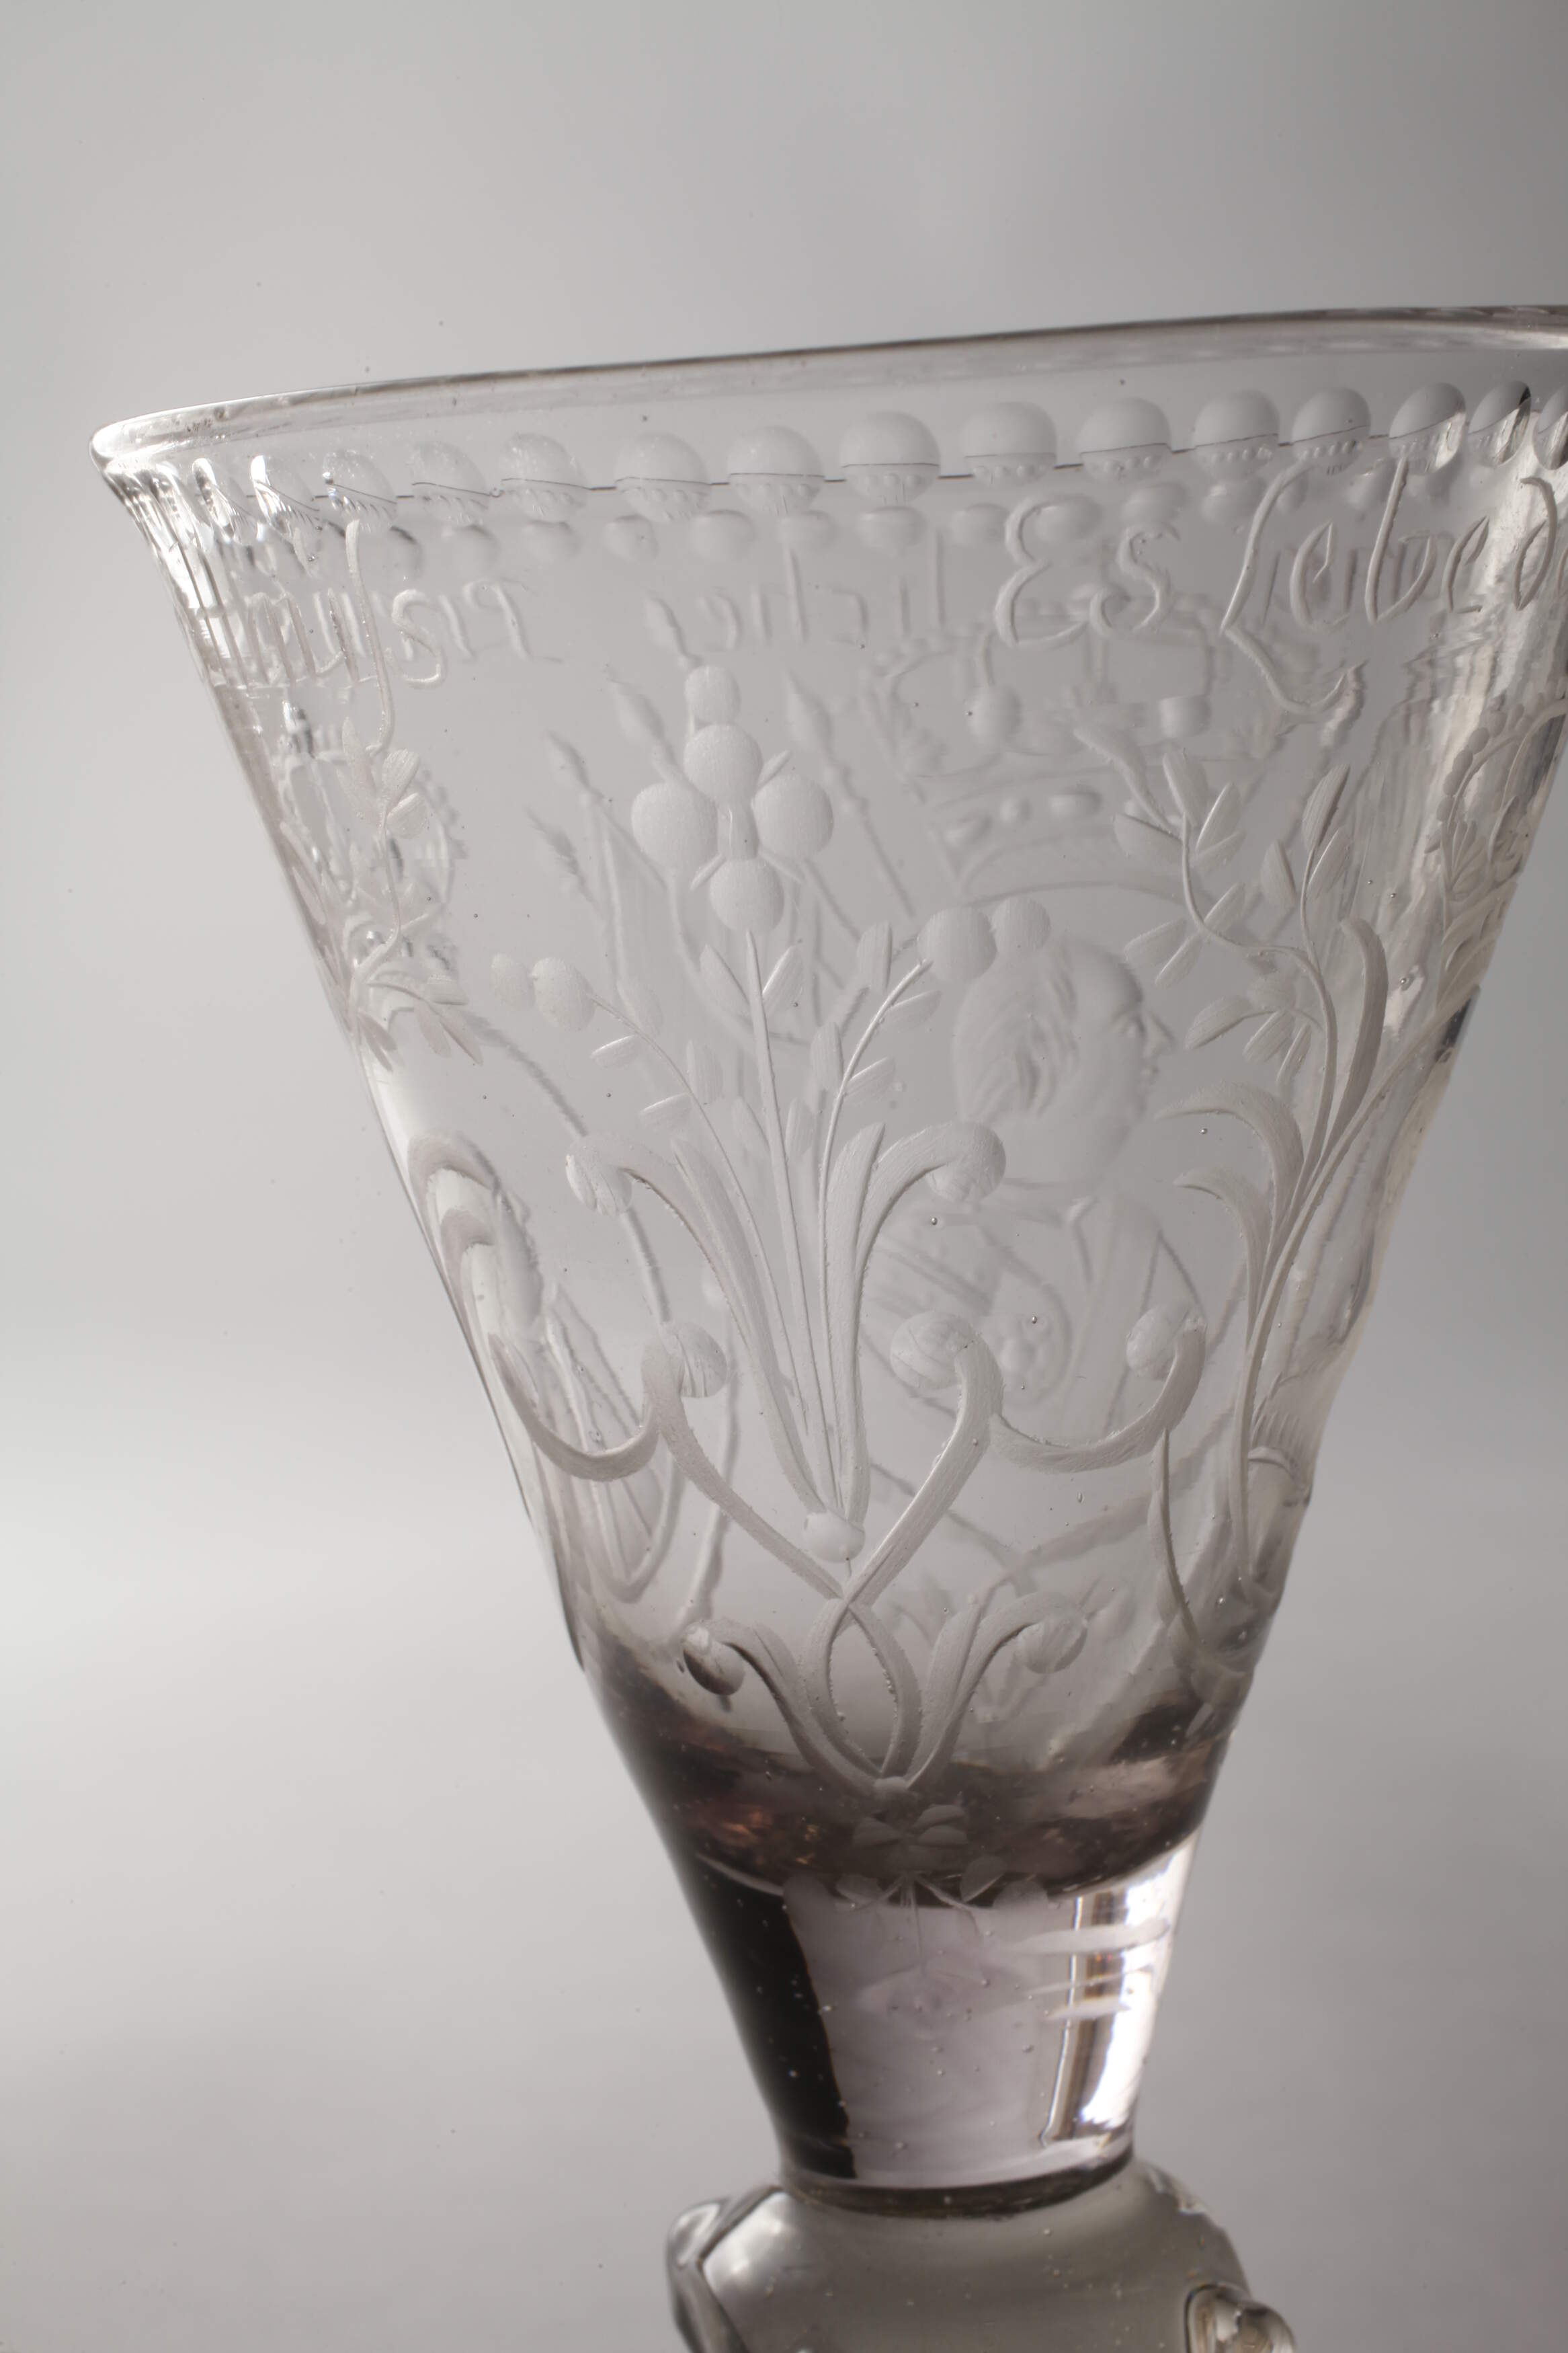 Spouted goblet from the Prussian royal house - Image 5 of 6